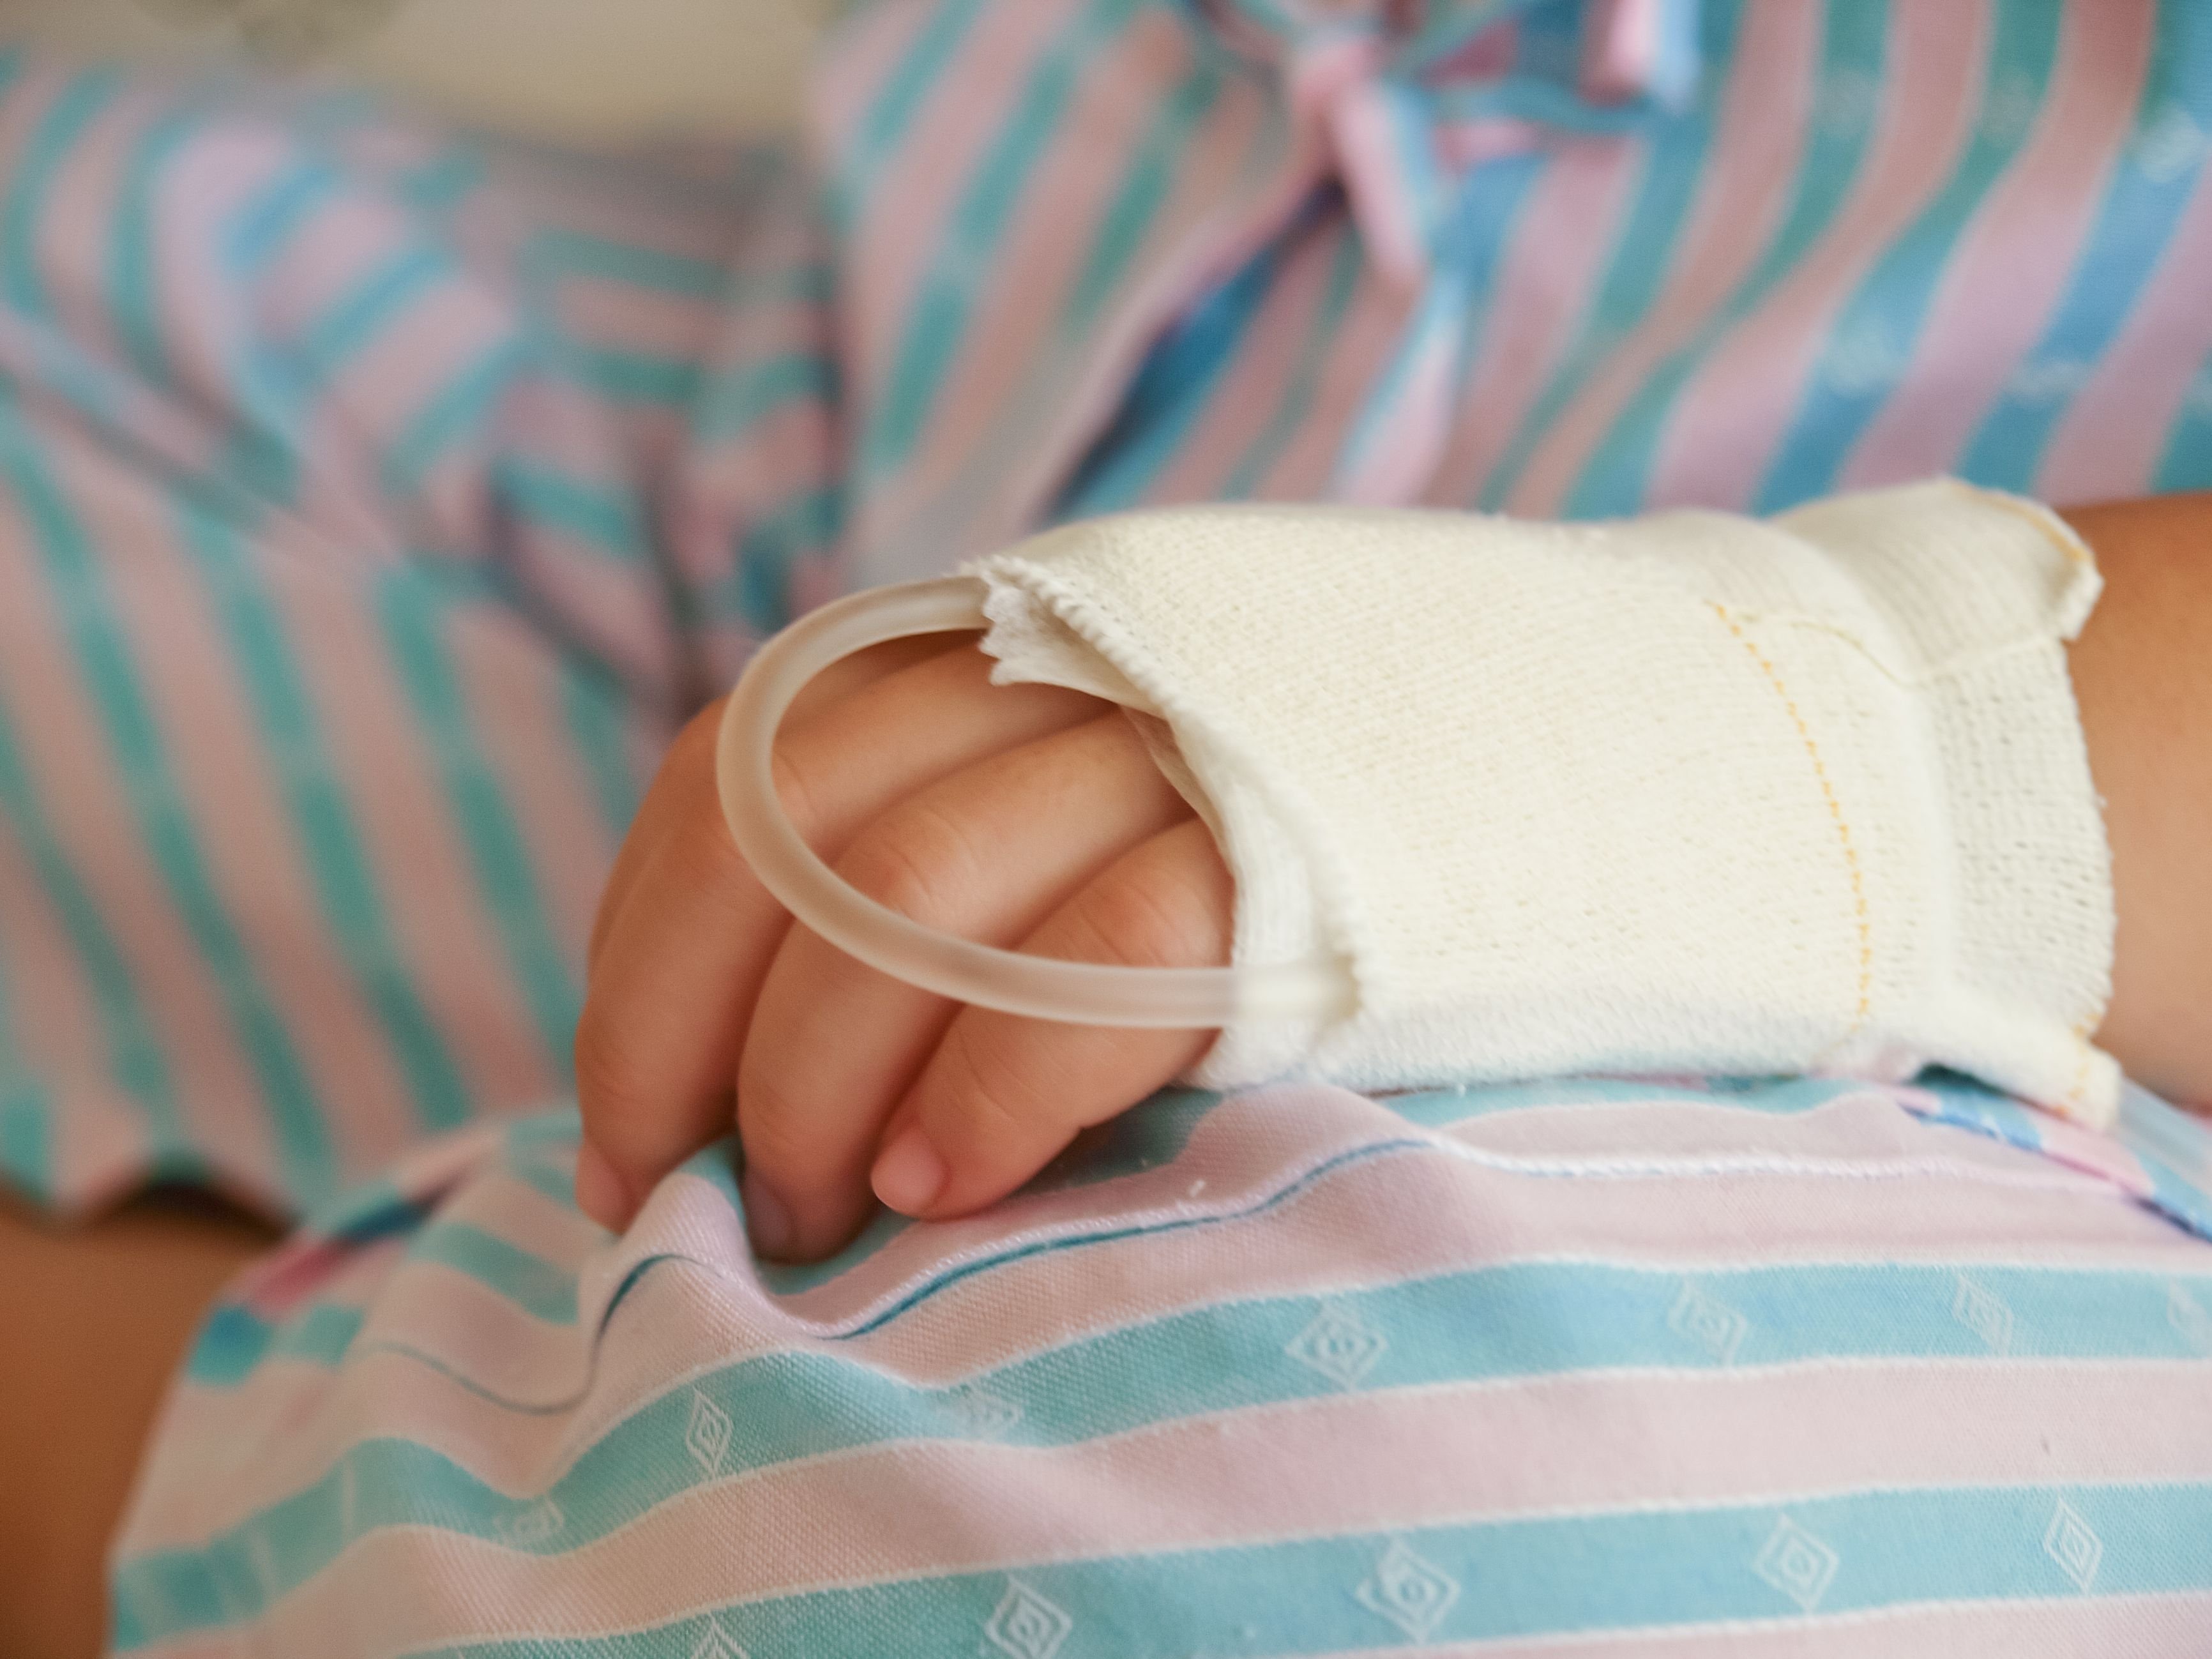 A child wearing pajamas while admitted in a hospital. | Source: Shutterstock